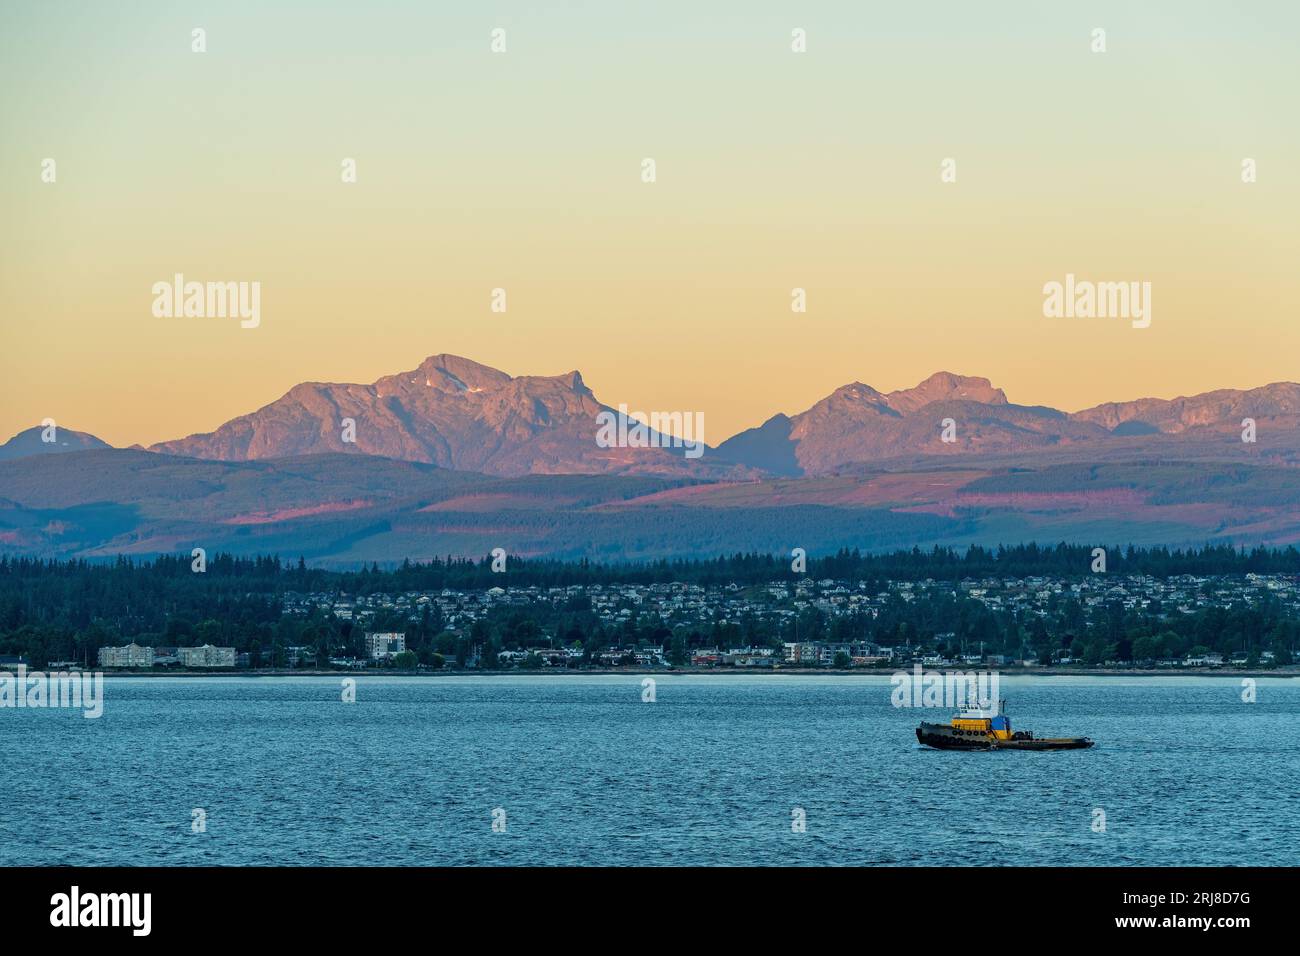 Campbell River skyline at sunrise seen from Quadra Island and Vancouver Island mountain ranges, British Columbia, Canada. Stock Photo